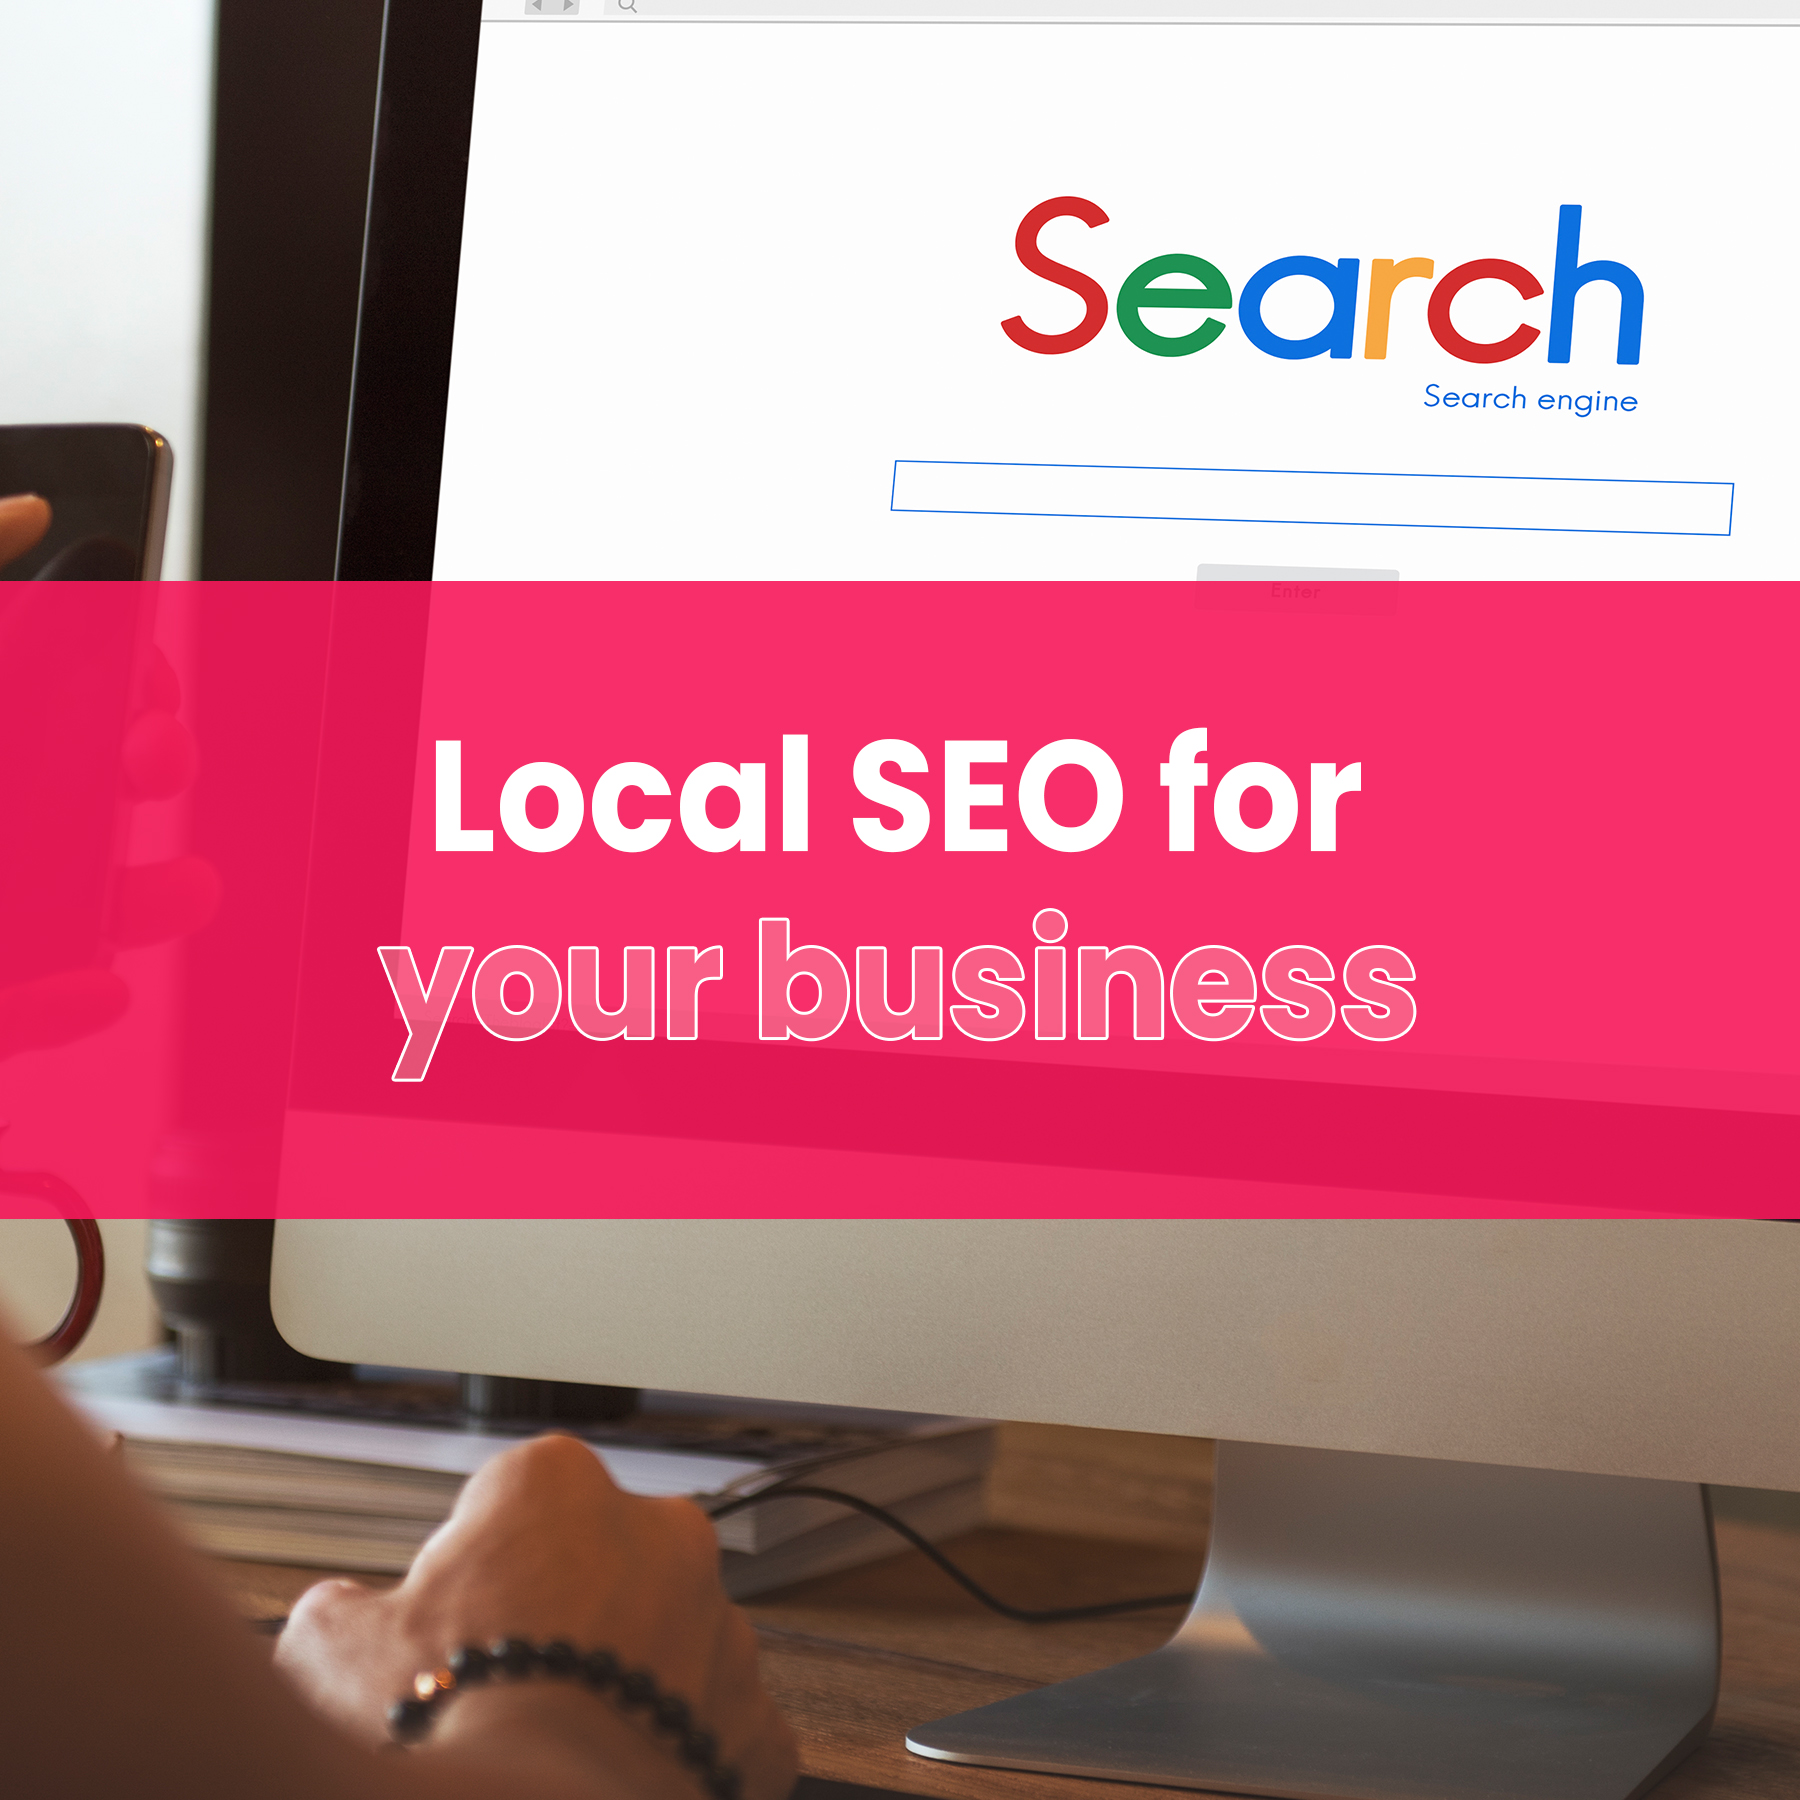 local-seo-for-your-business-local-seo-services-in-dubai-webvizion-global